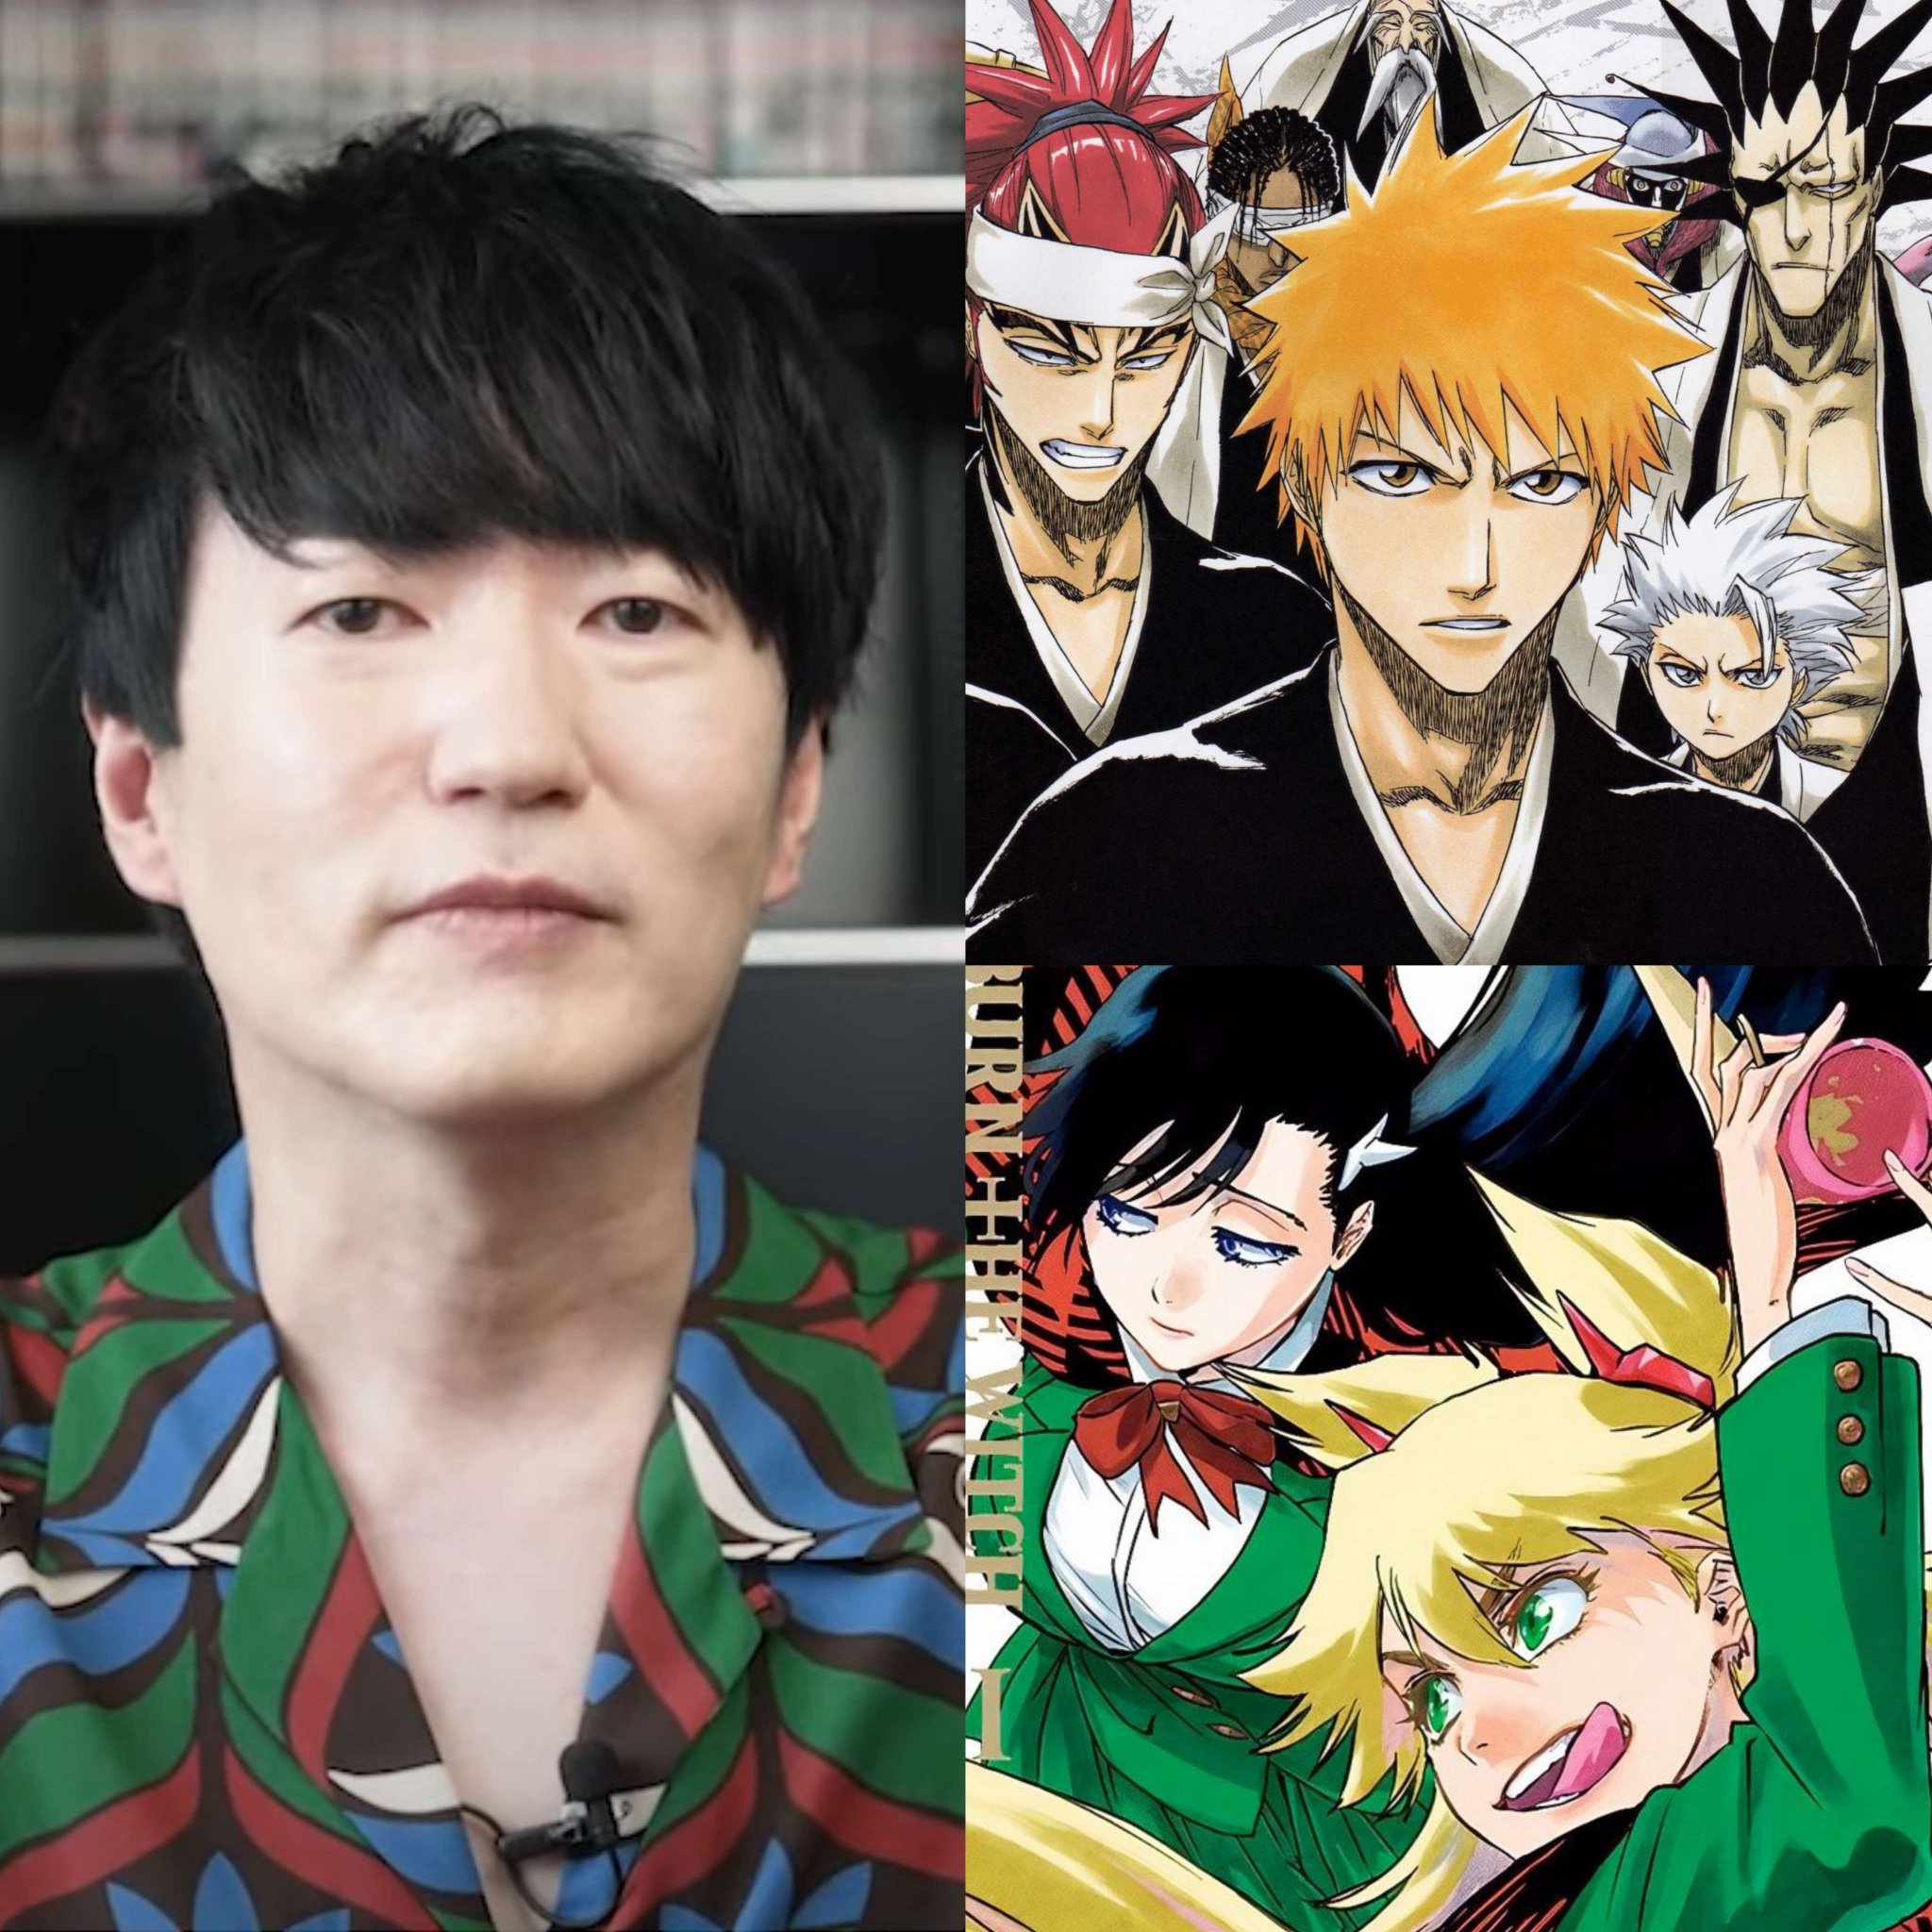  Happy Birthday to Tite Kubo, the creator of BLEACH and Burn the Witch! The mangaka turned 46!   